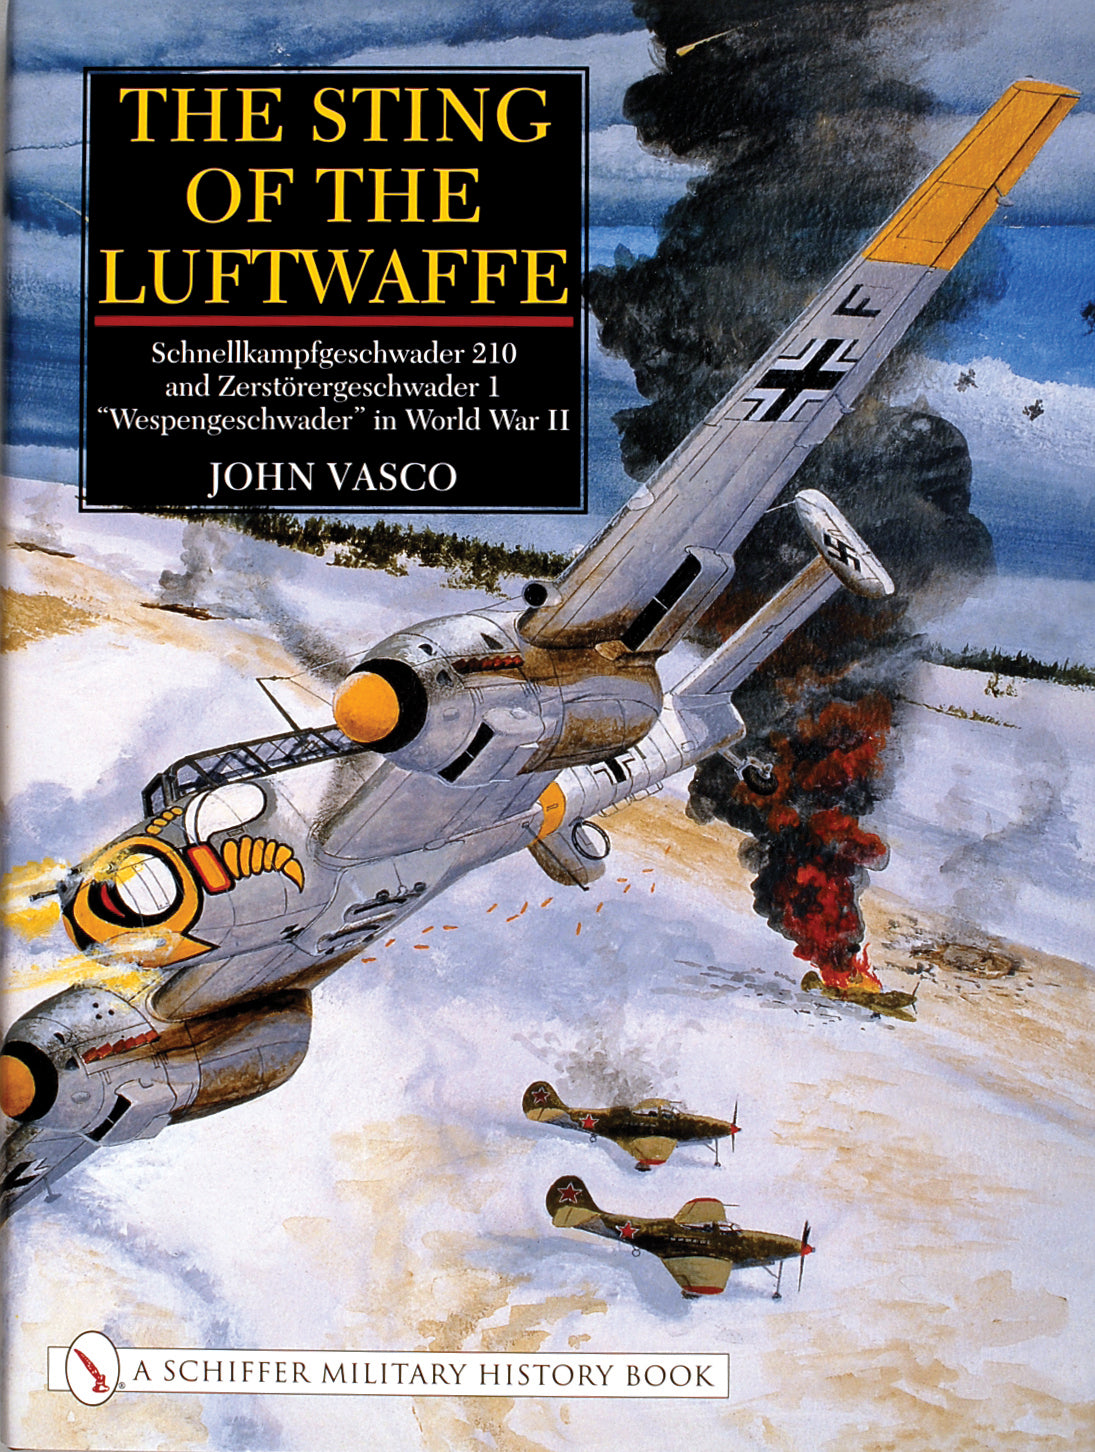 The Sting of the Luftwaffe